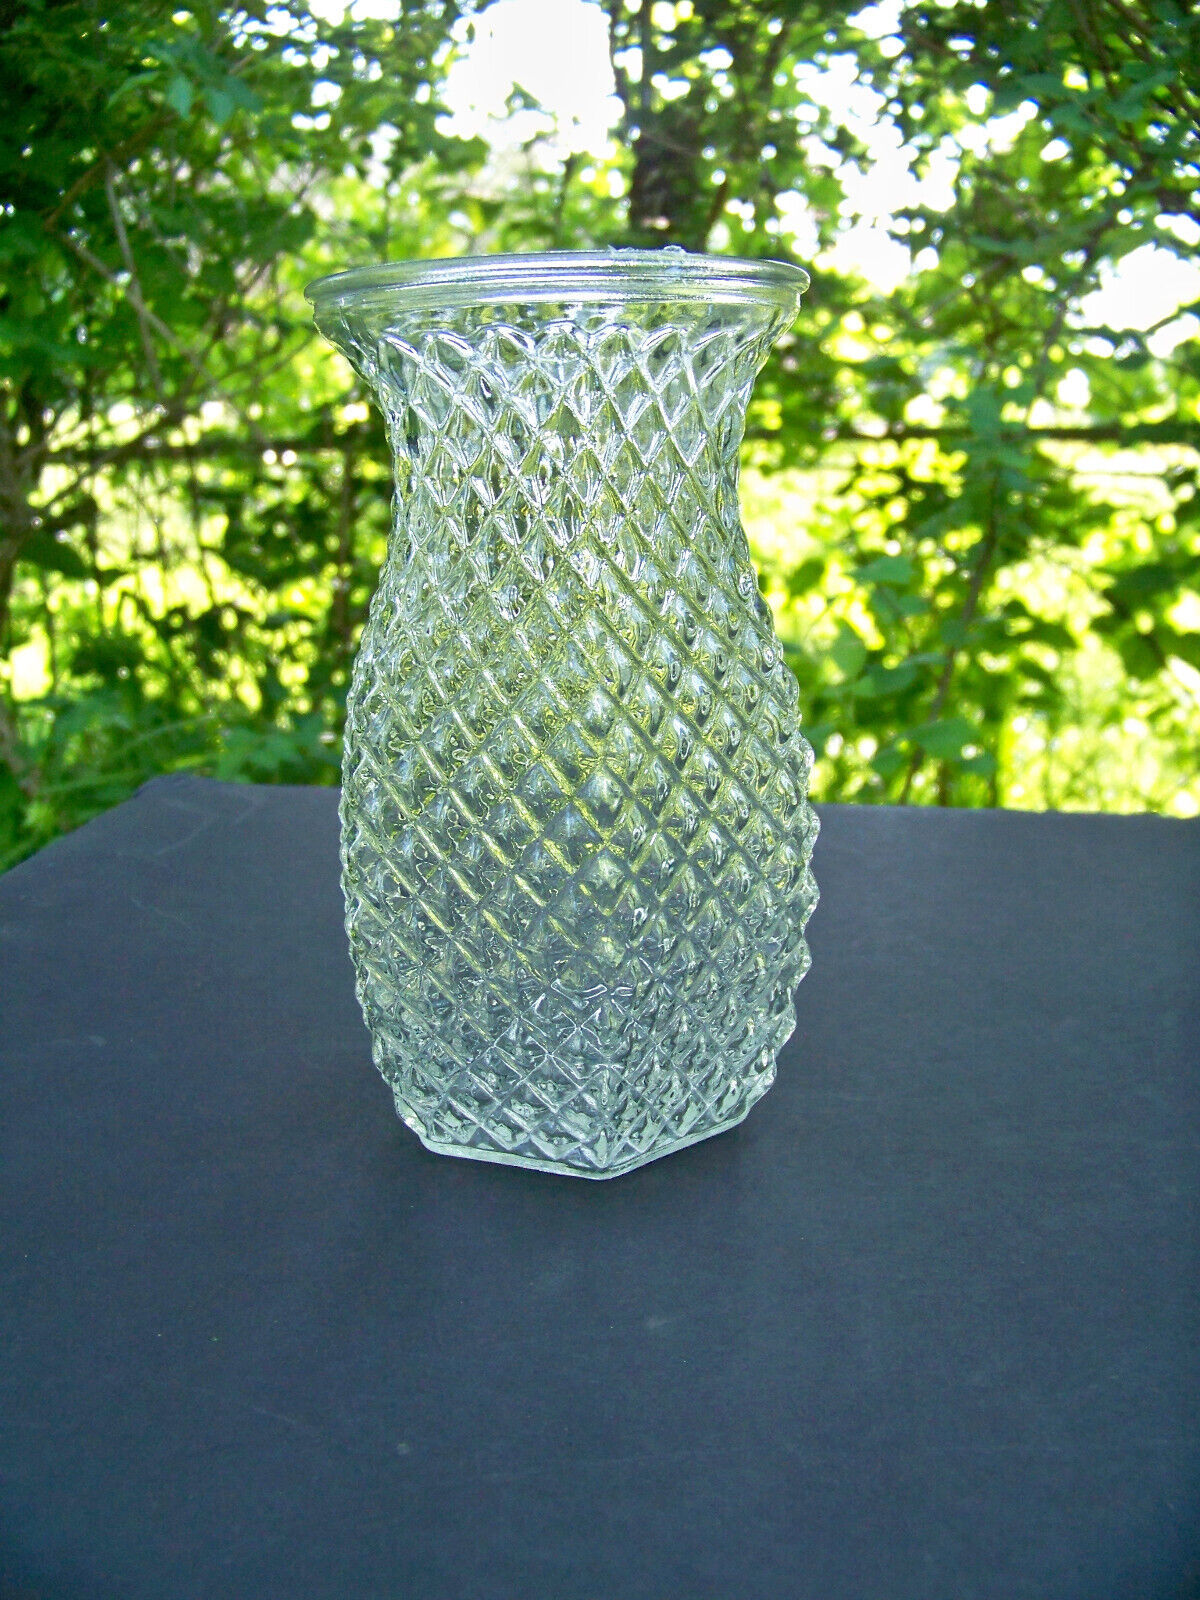 Primary image for Vintage Hoosier Glass Diamond Point Saw Tooth Pineapple Vase Clear #4071